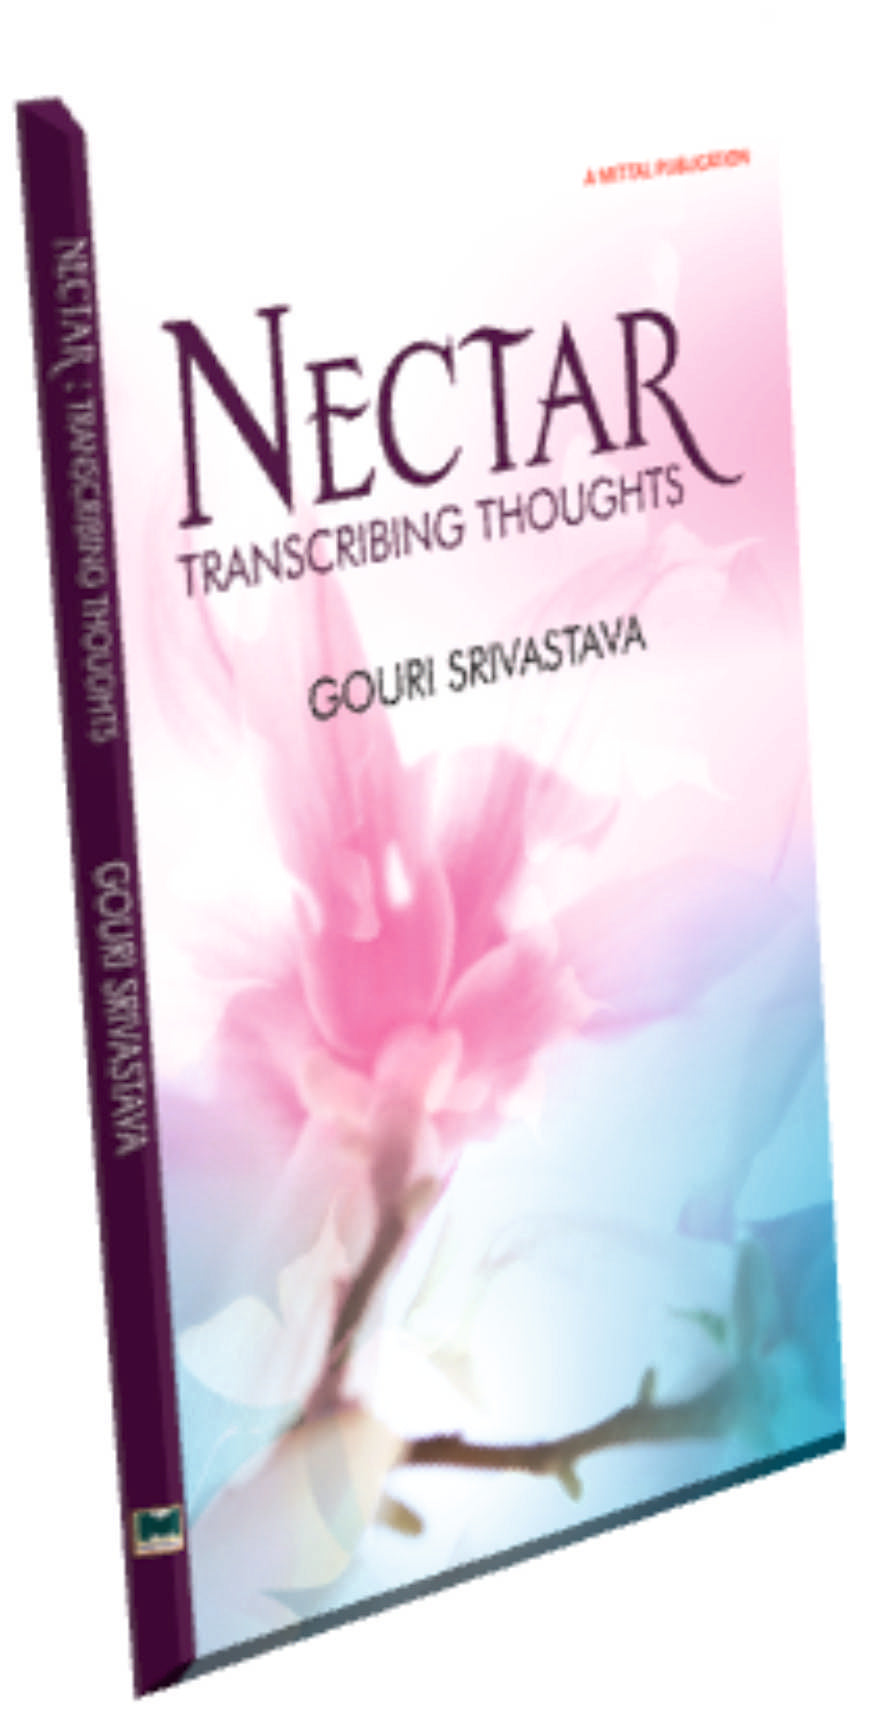 Nectar: Transcribing Thoughts by Gouri Srivastava